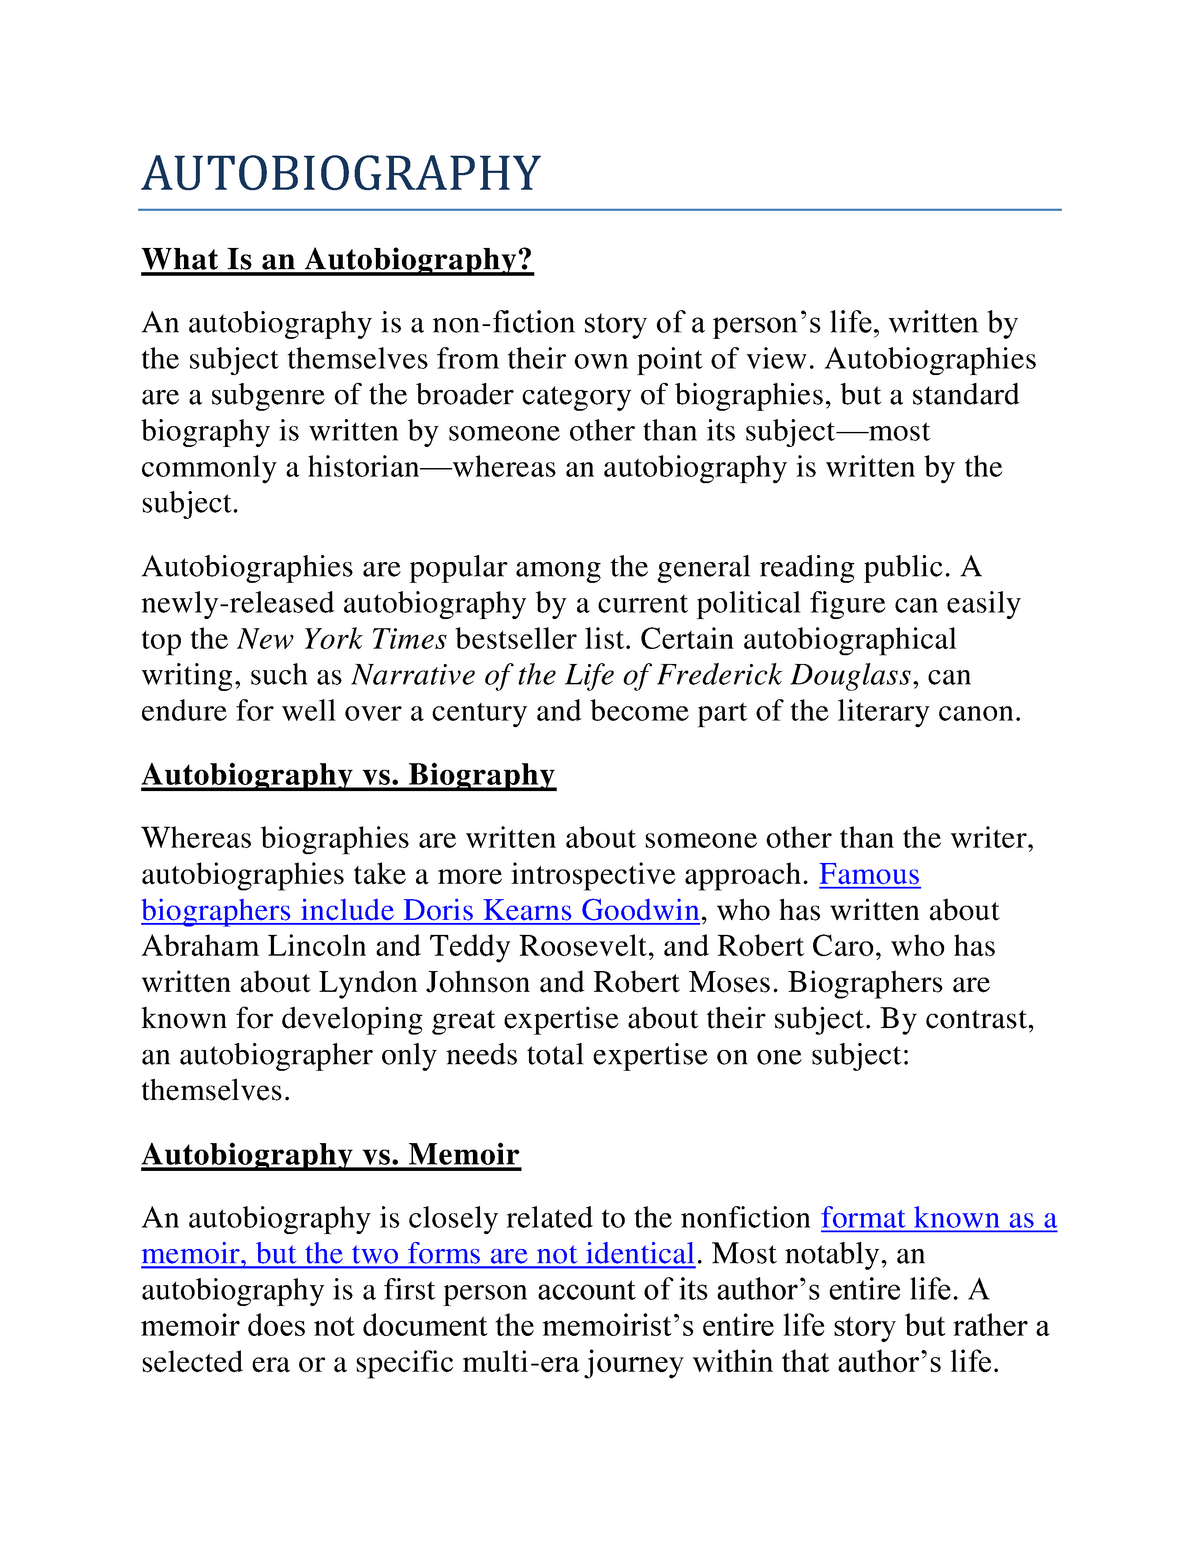 biography and autobiography meaning in english